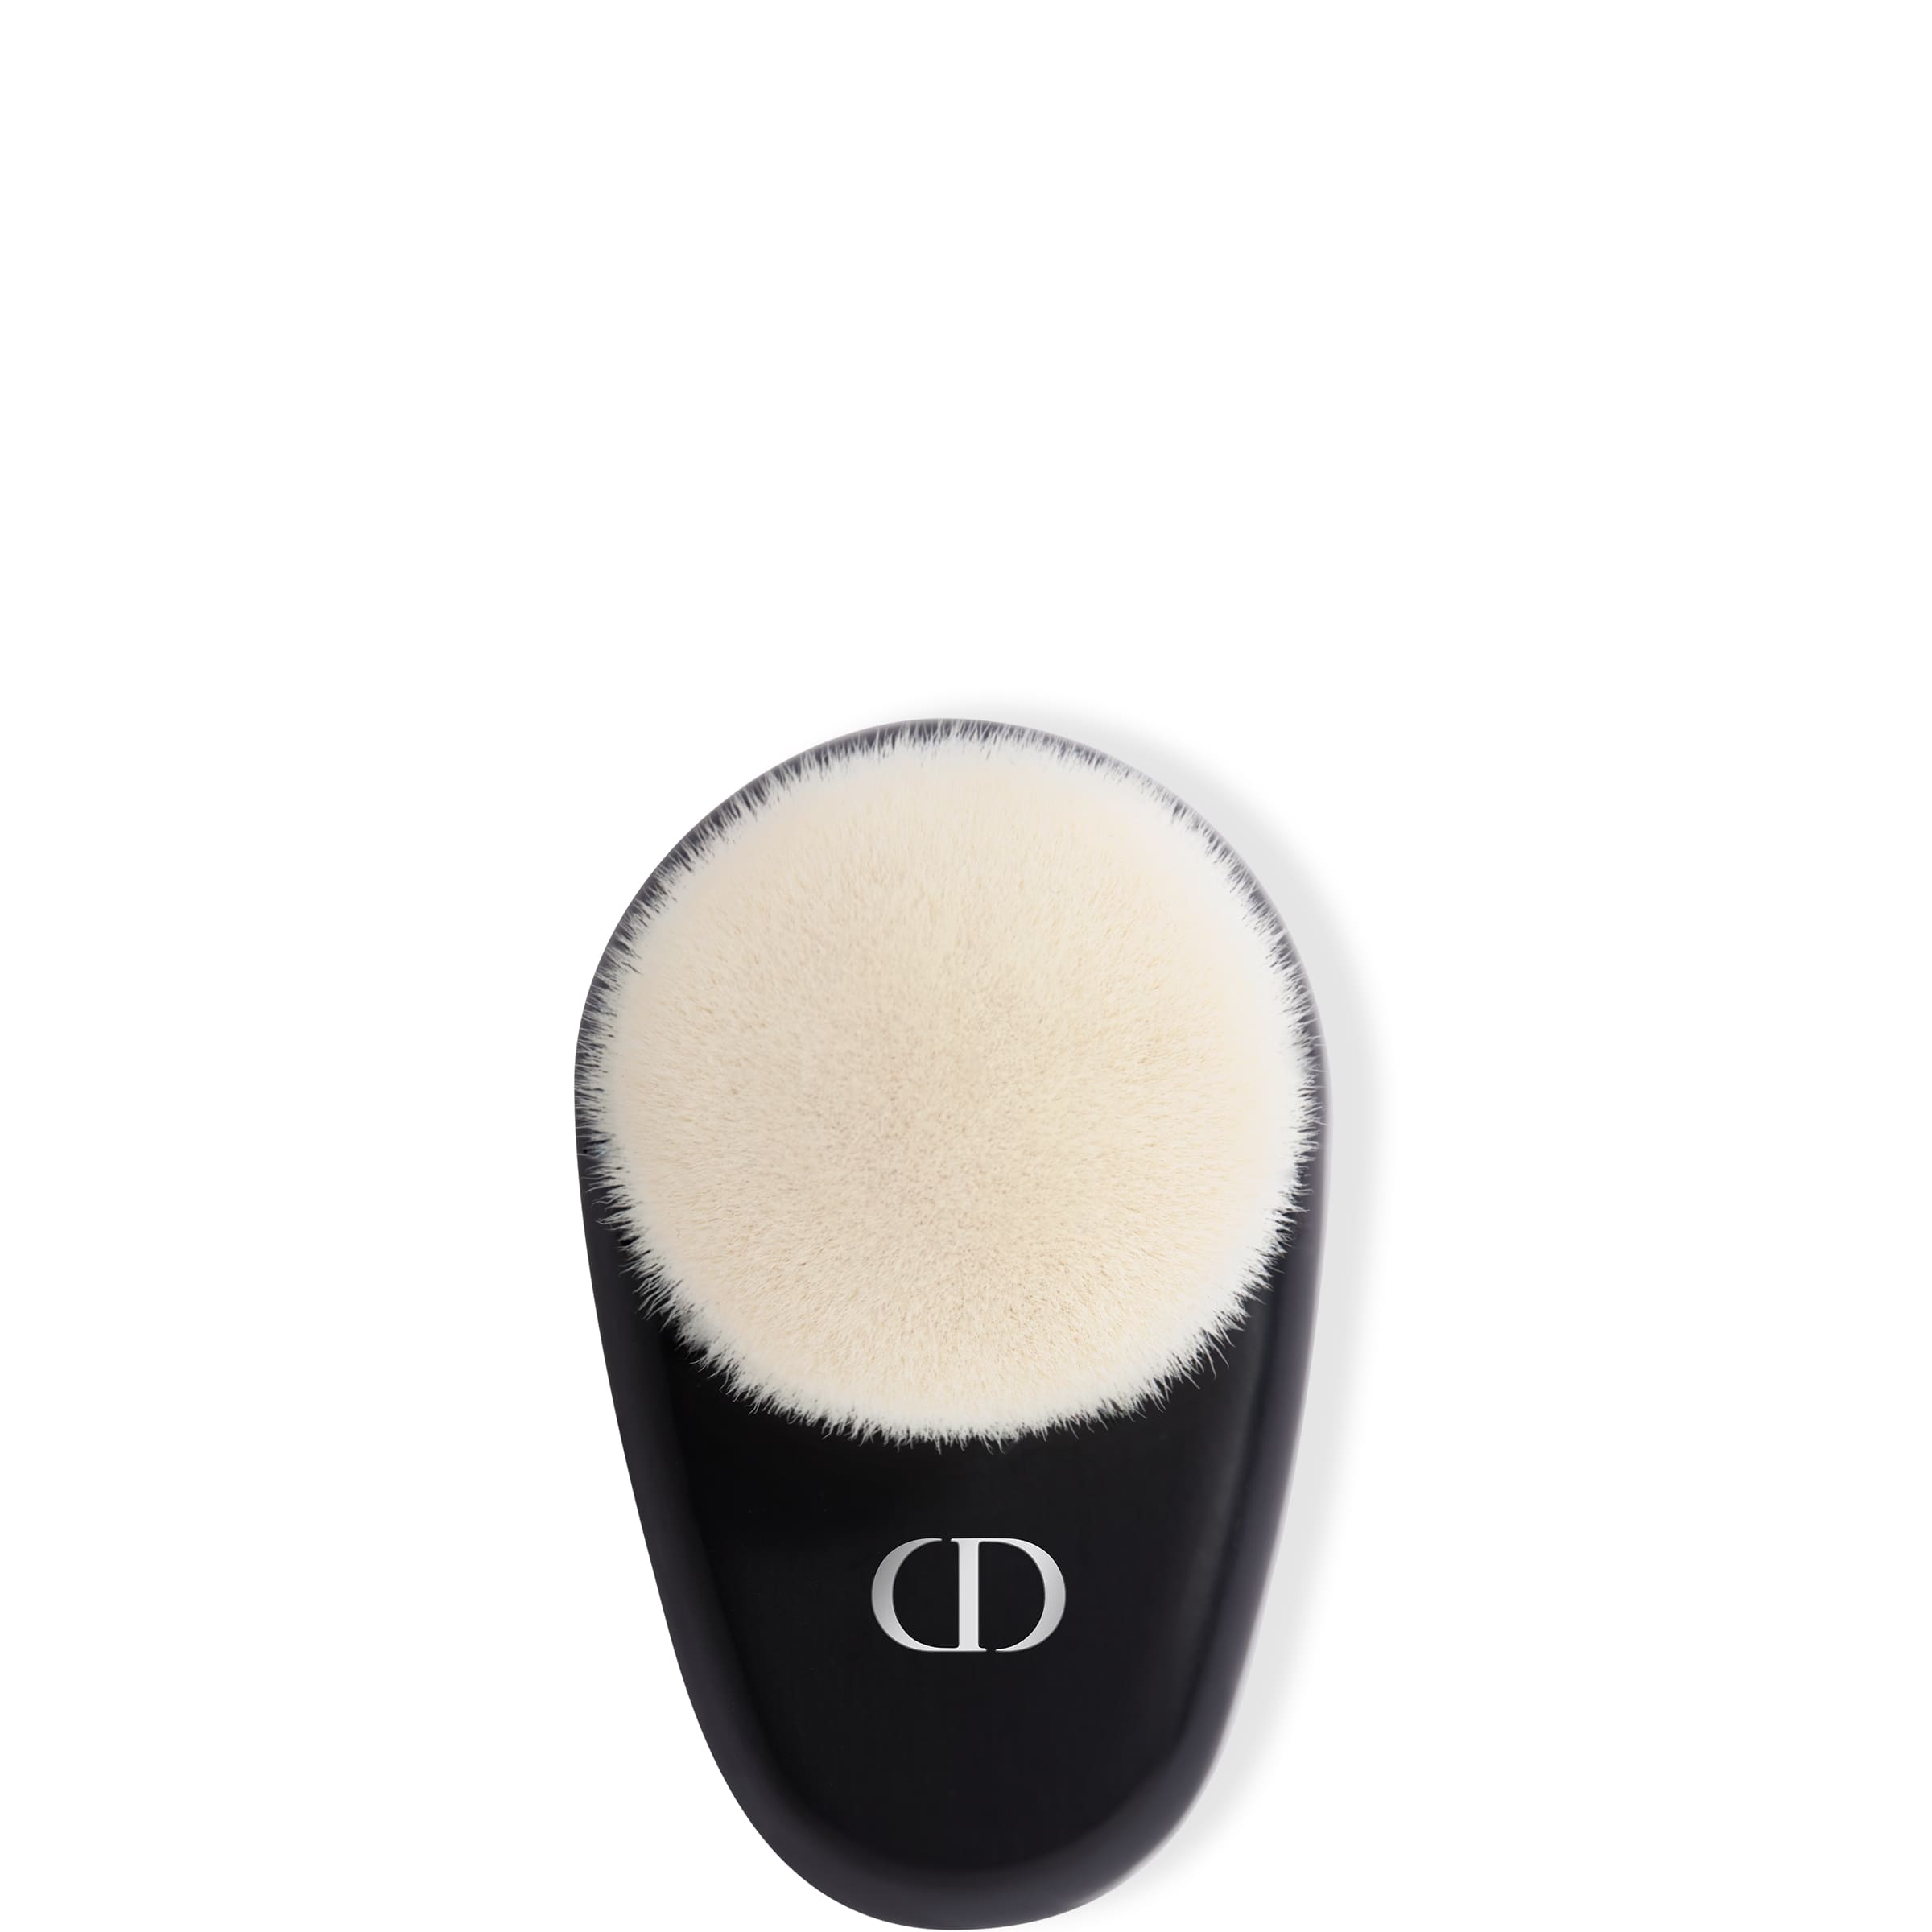 Backstage Face Brush N°18 Multi-use complexion brush